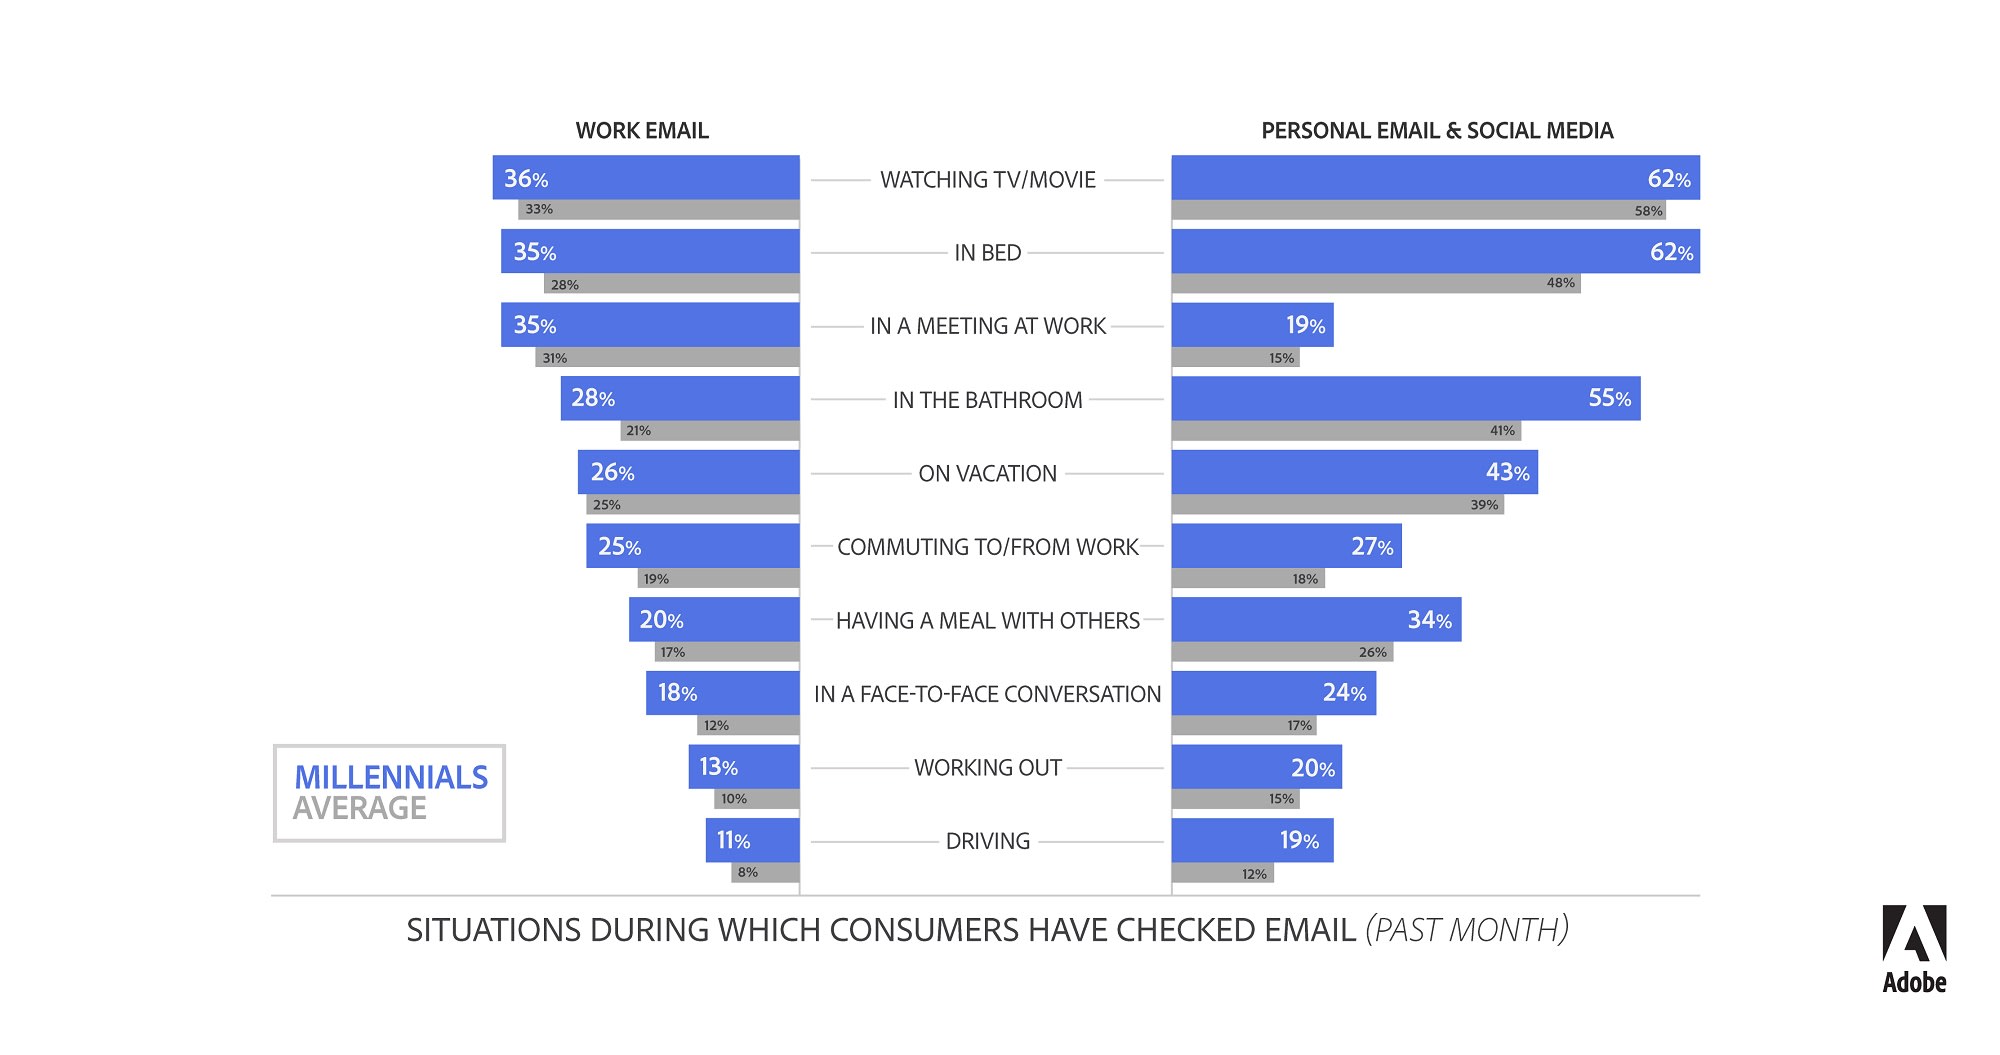 ONE TIME USE HANDOUT: Situations where Millennials check email